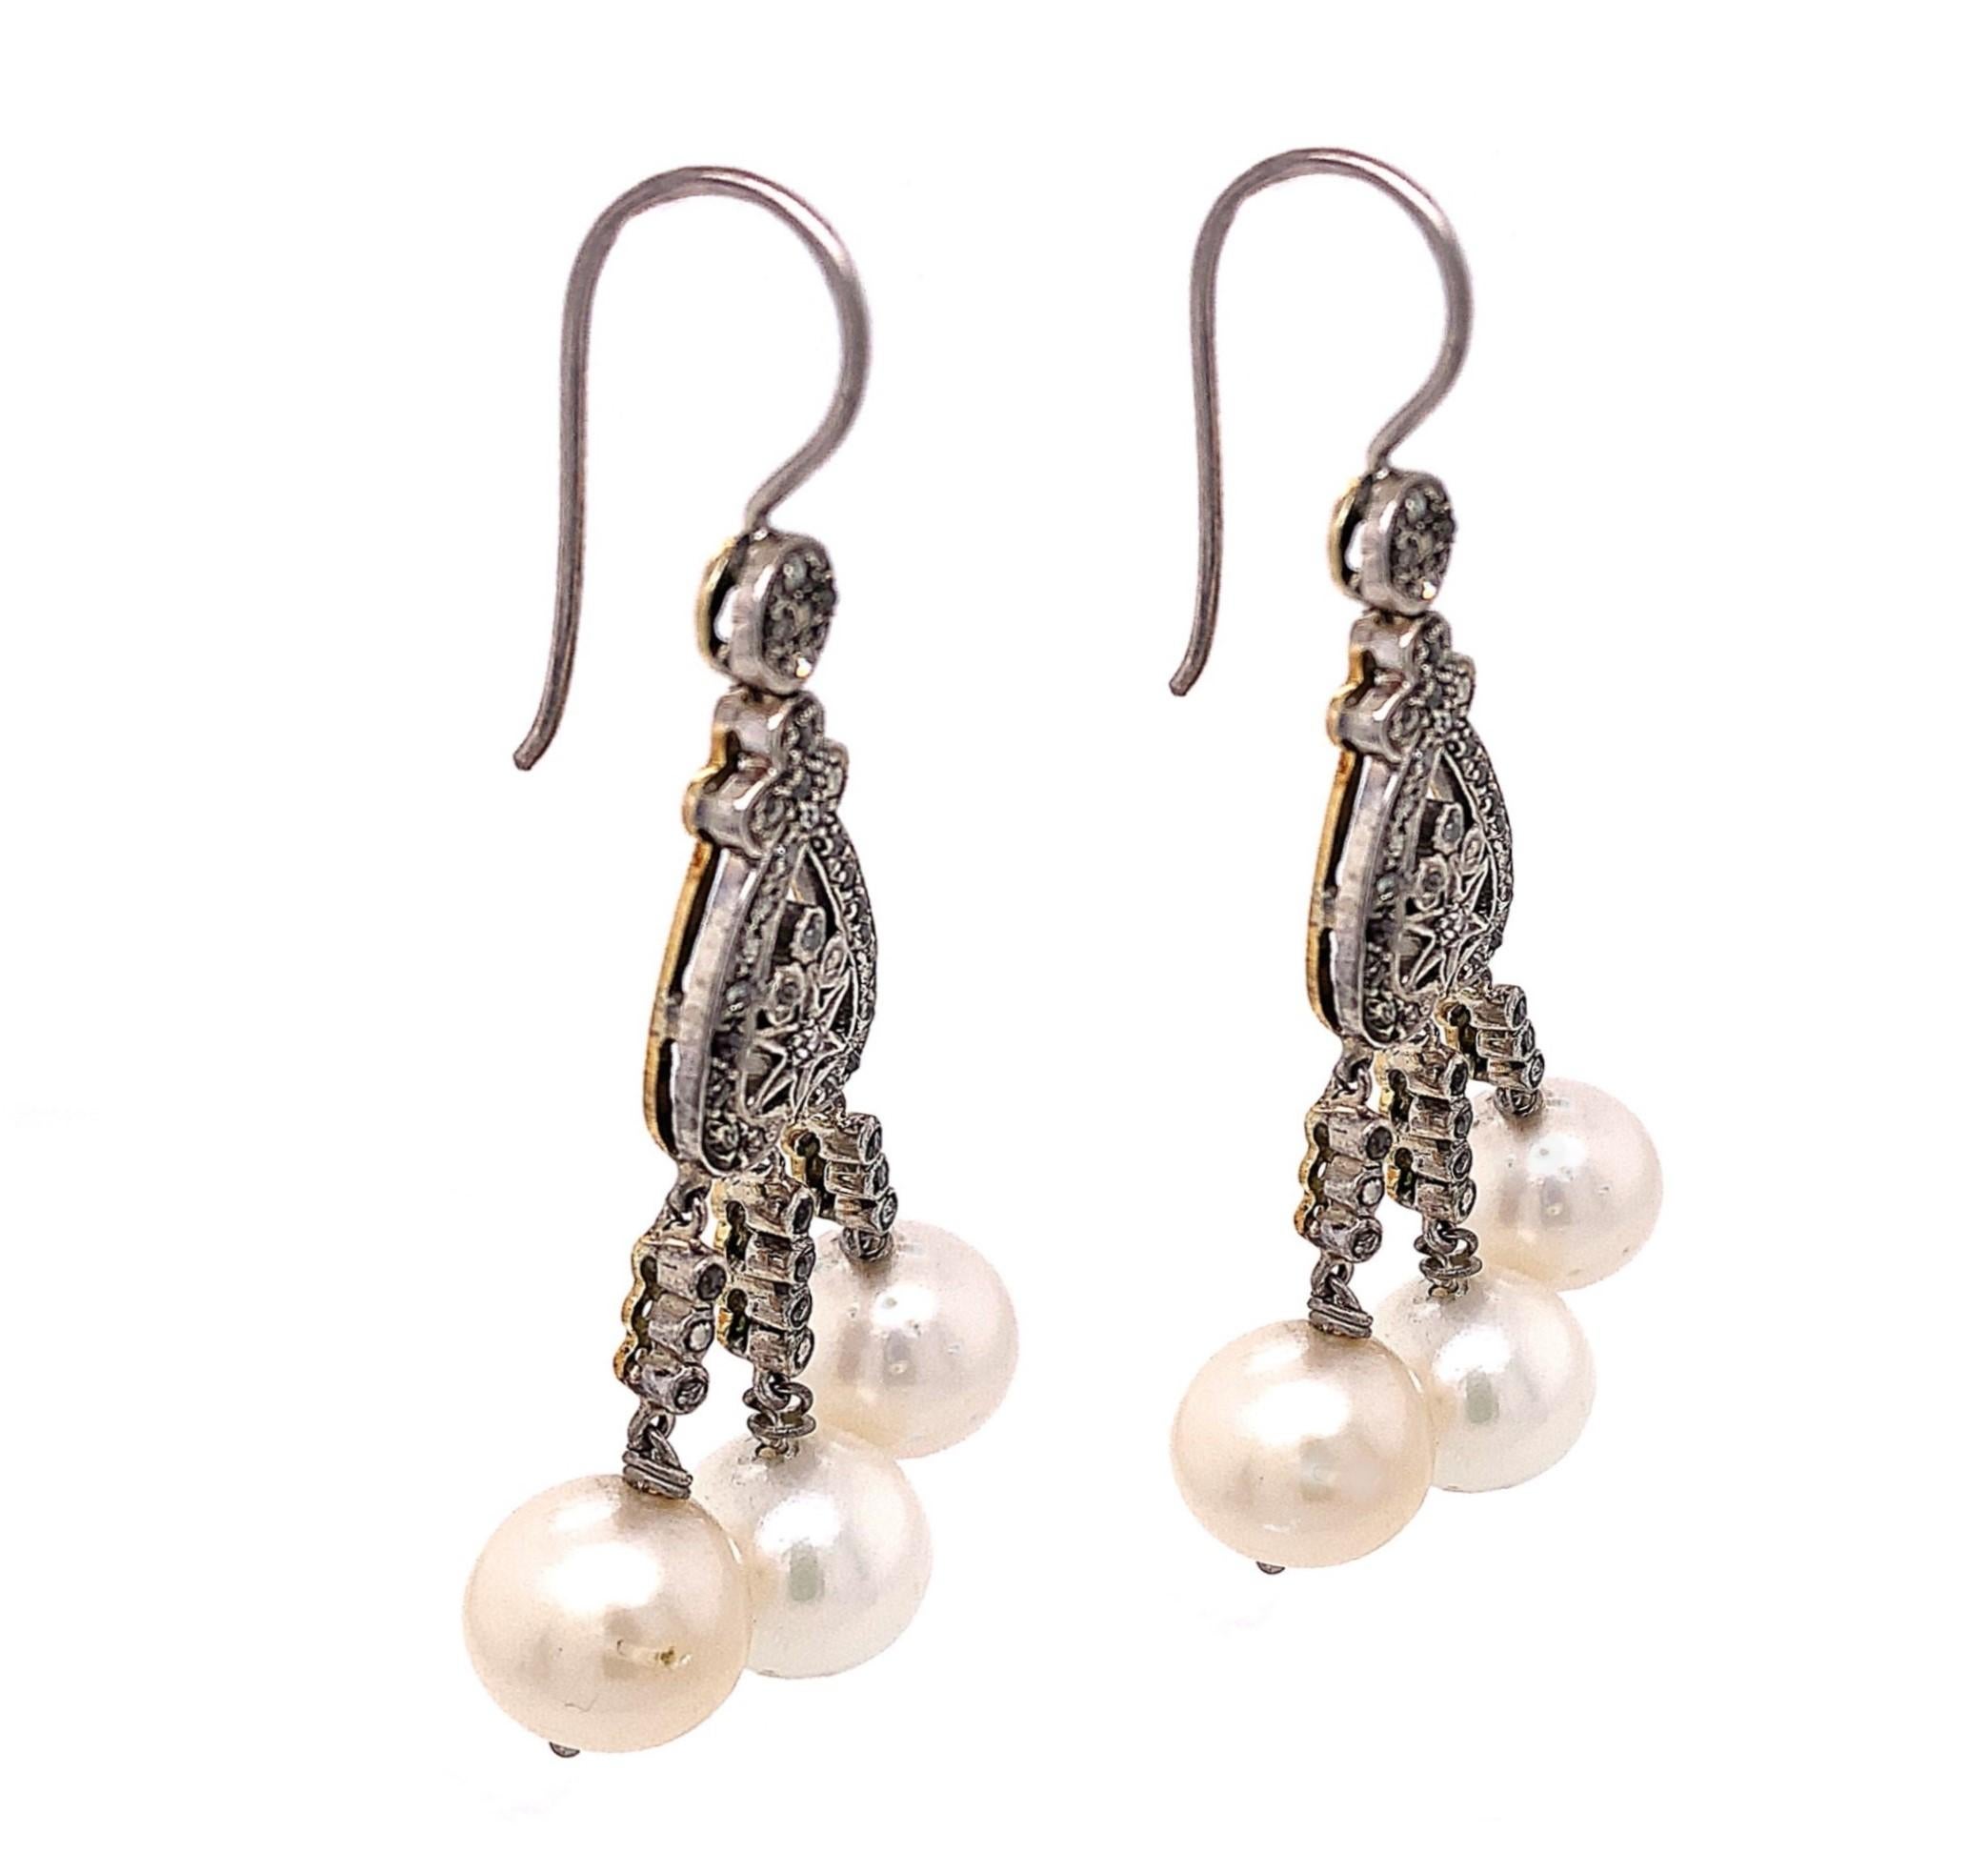 Moon Light Collection

South sea natural Pearl with icy Diamond chandelier earring set in Sterling Silver and 18K White Gold.

Pearl: 61.85ct total weight.
Diamond: 1.10ct total weight.
